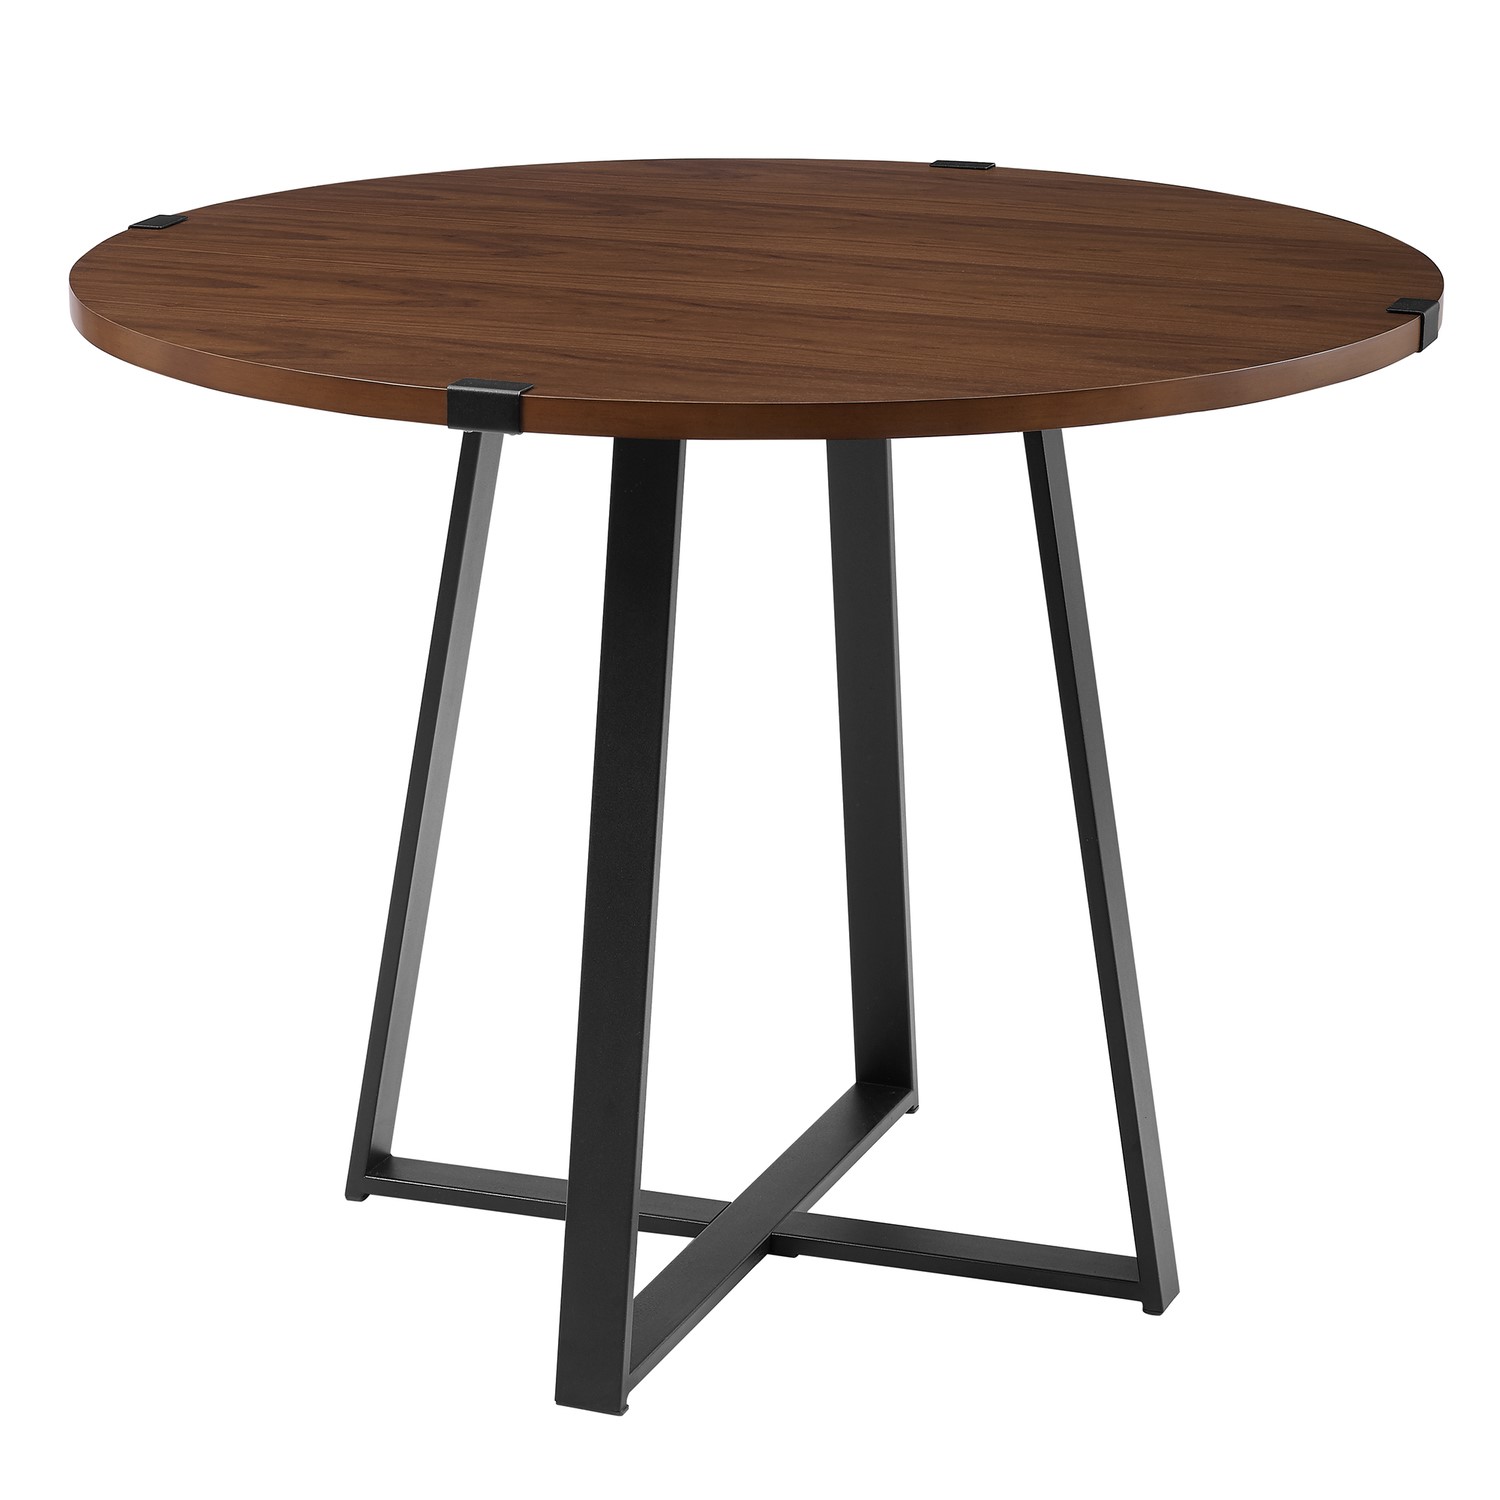 Round Dark Wood Dining Table With Black Metal Legs Seats 4 Foster